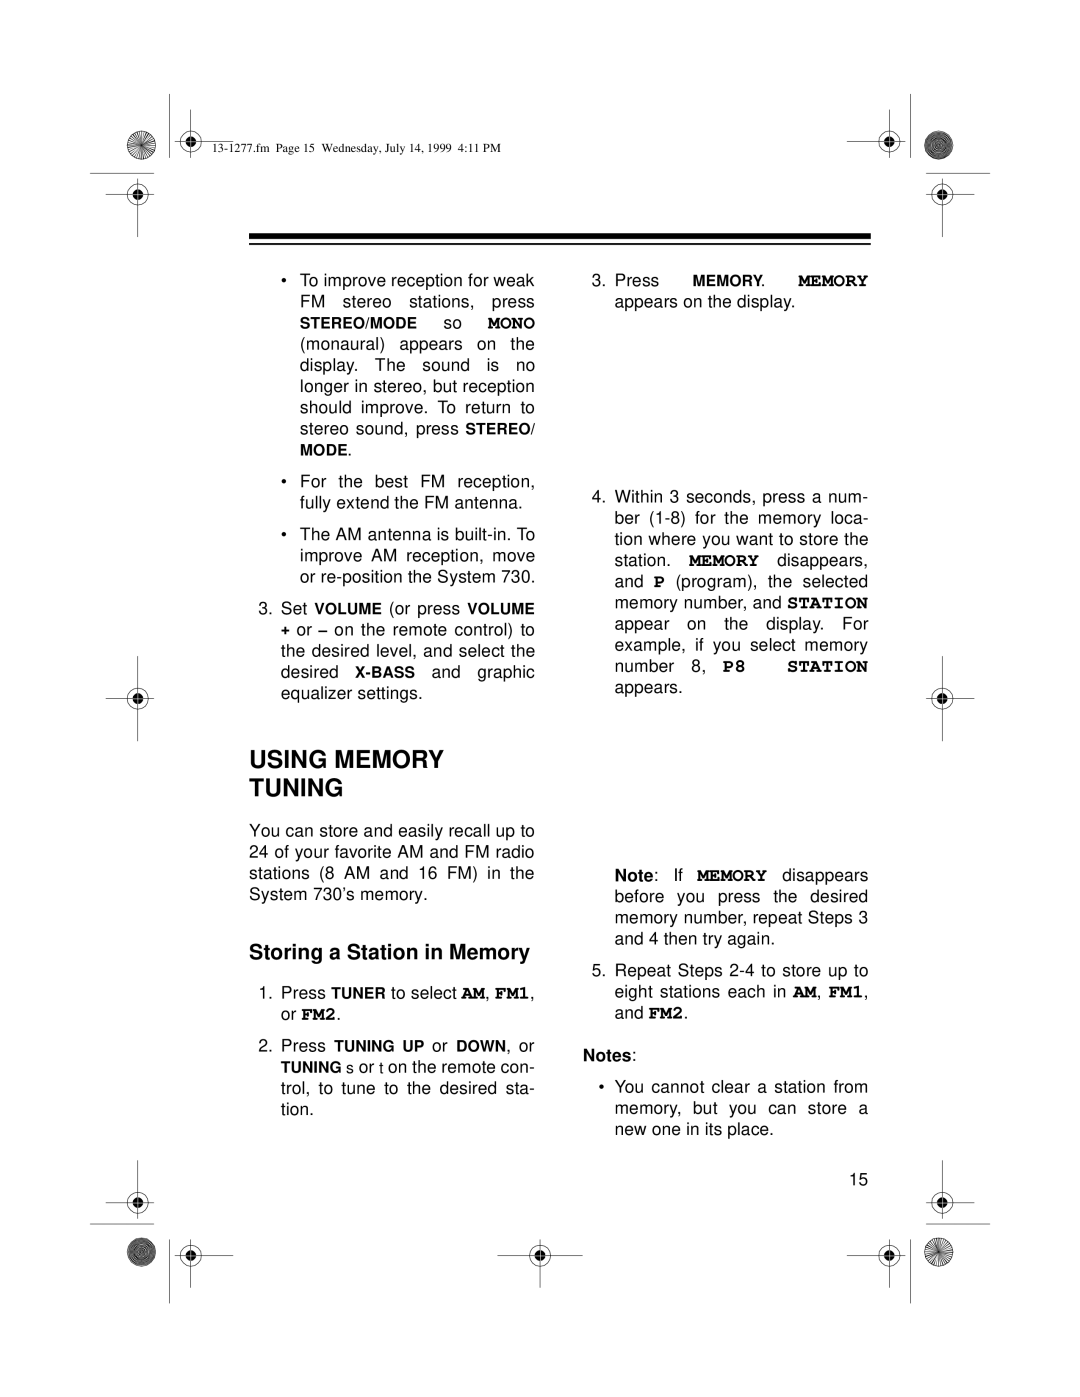 Optimus SYSTEM 730 owner manual Using Memory Tuning, Storing a Station in Memory 